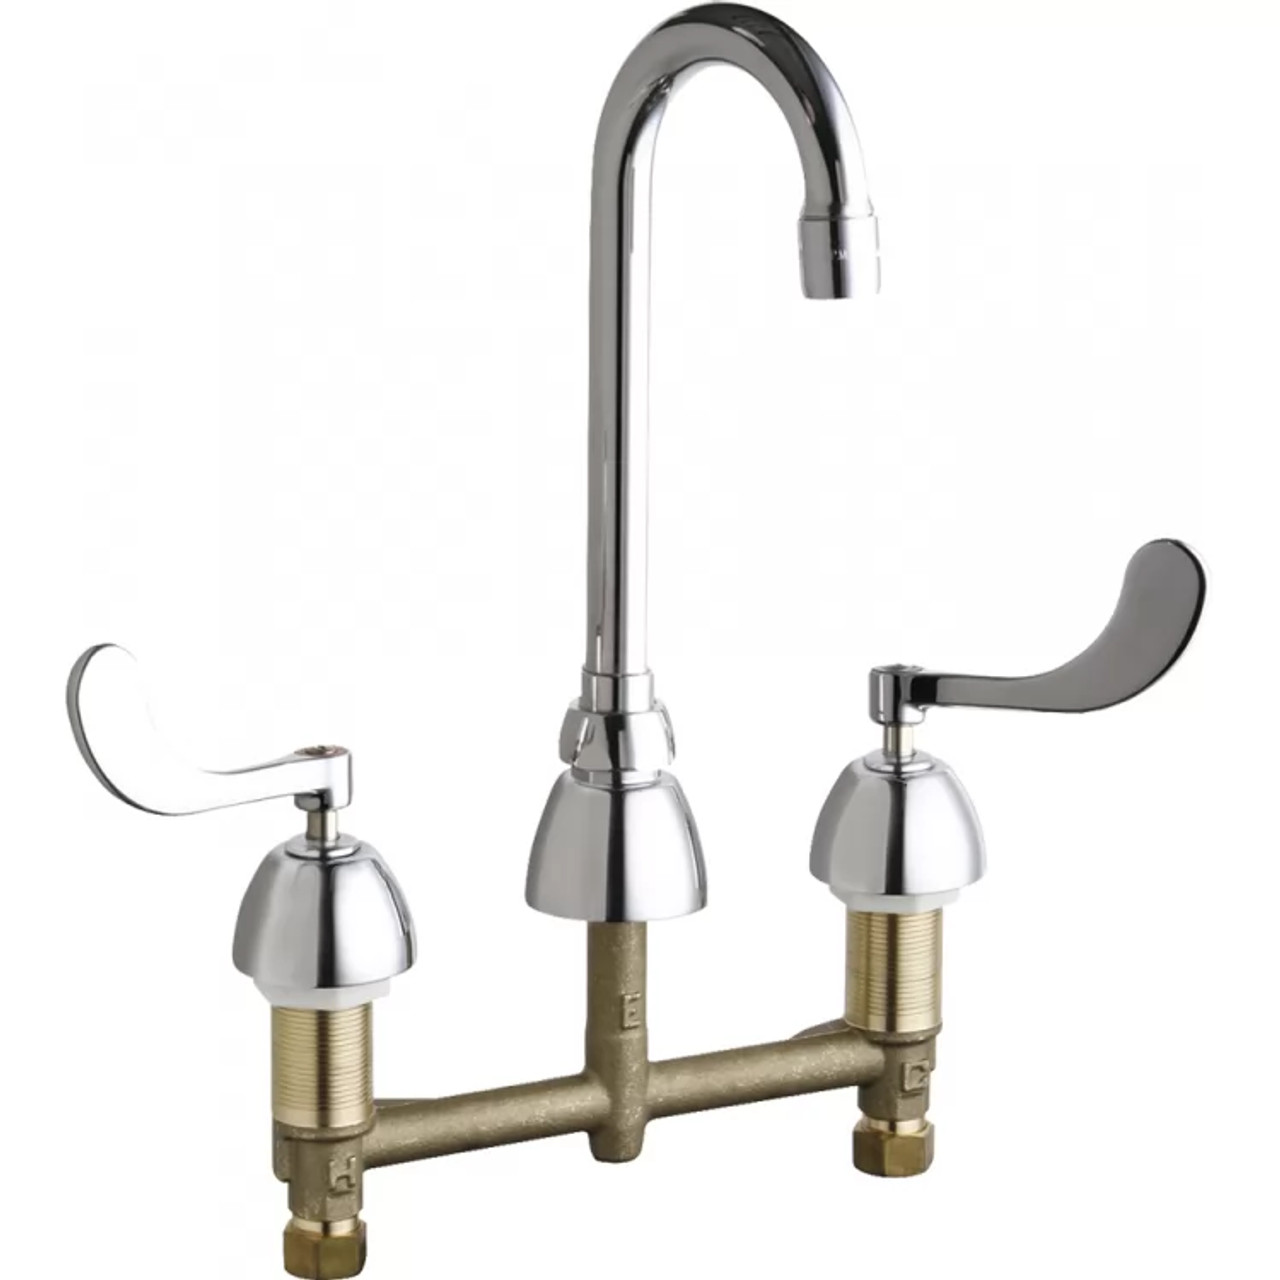 Concealed Hot/Cold Water Kitchen Sink Faucet